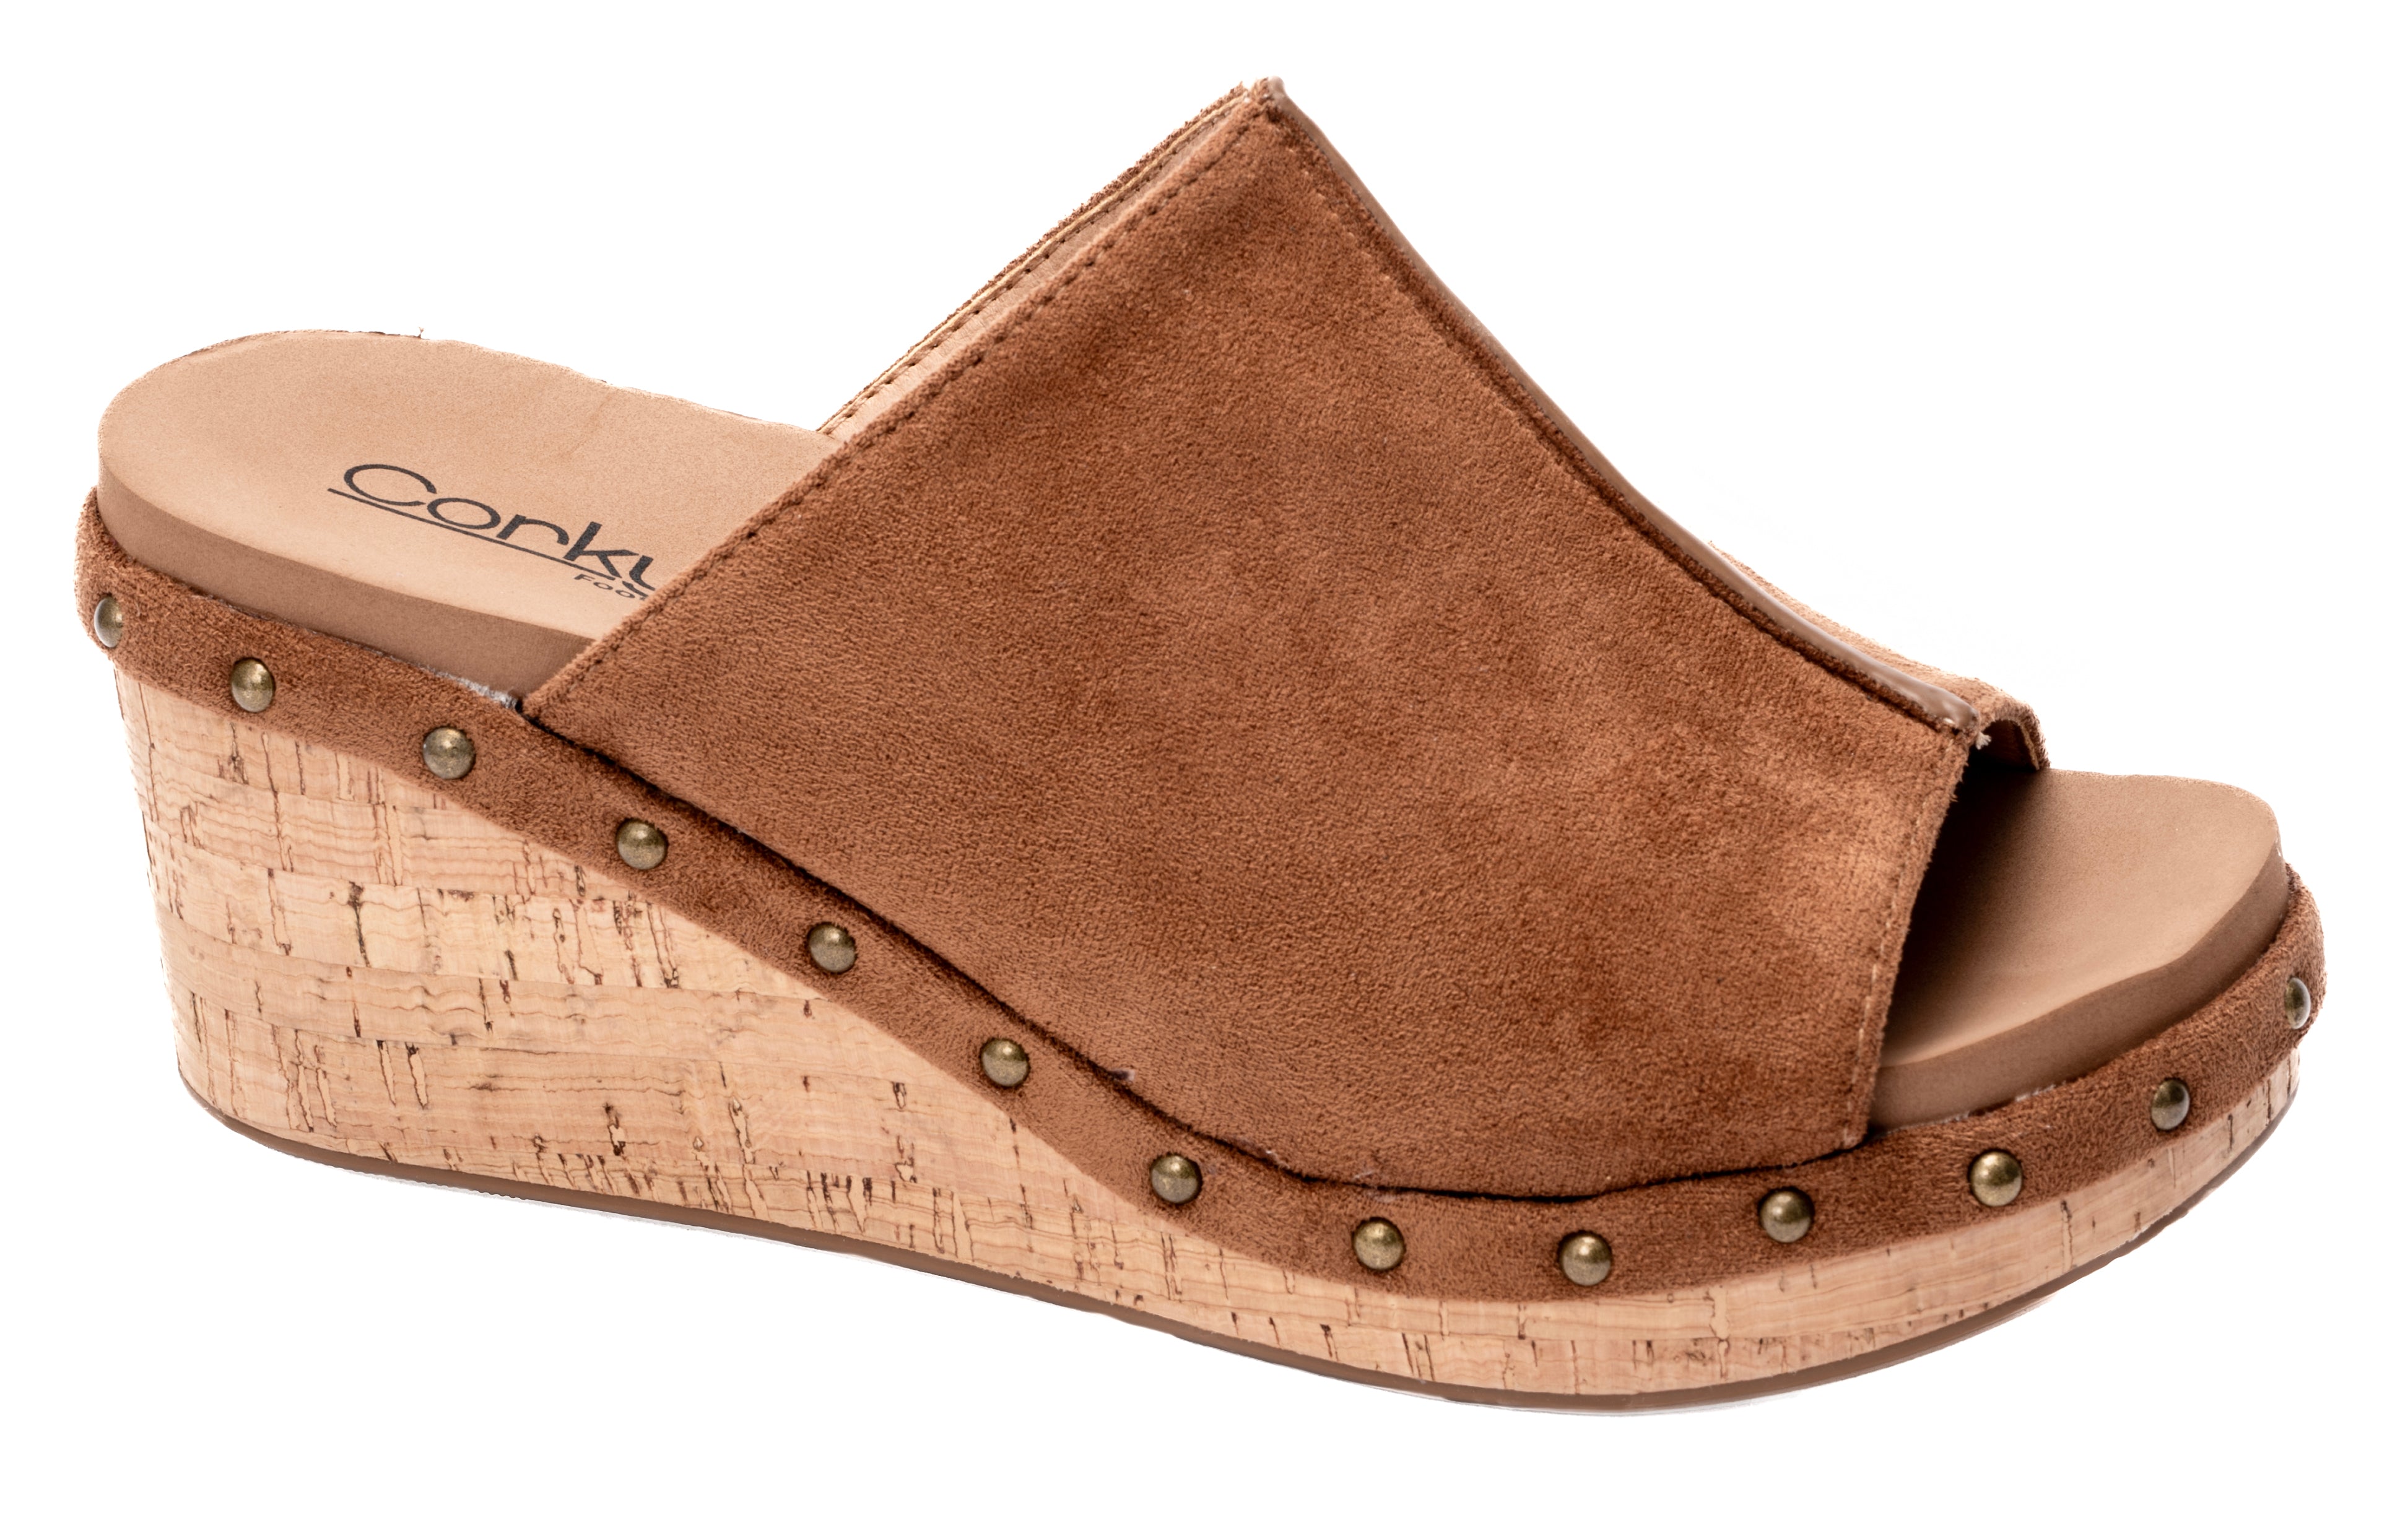 Market Live Preorder: Hissy Fit Wedge by Corky’s (Ships Late August)